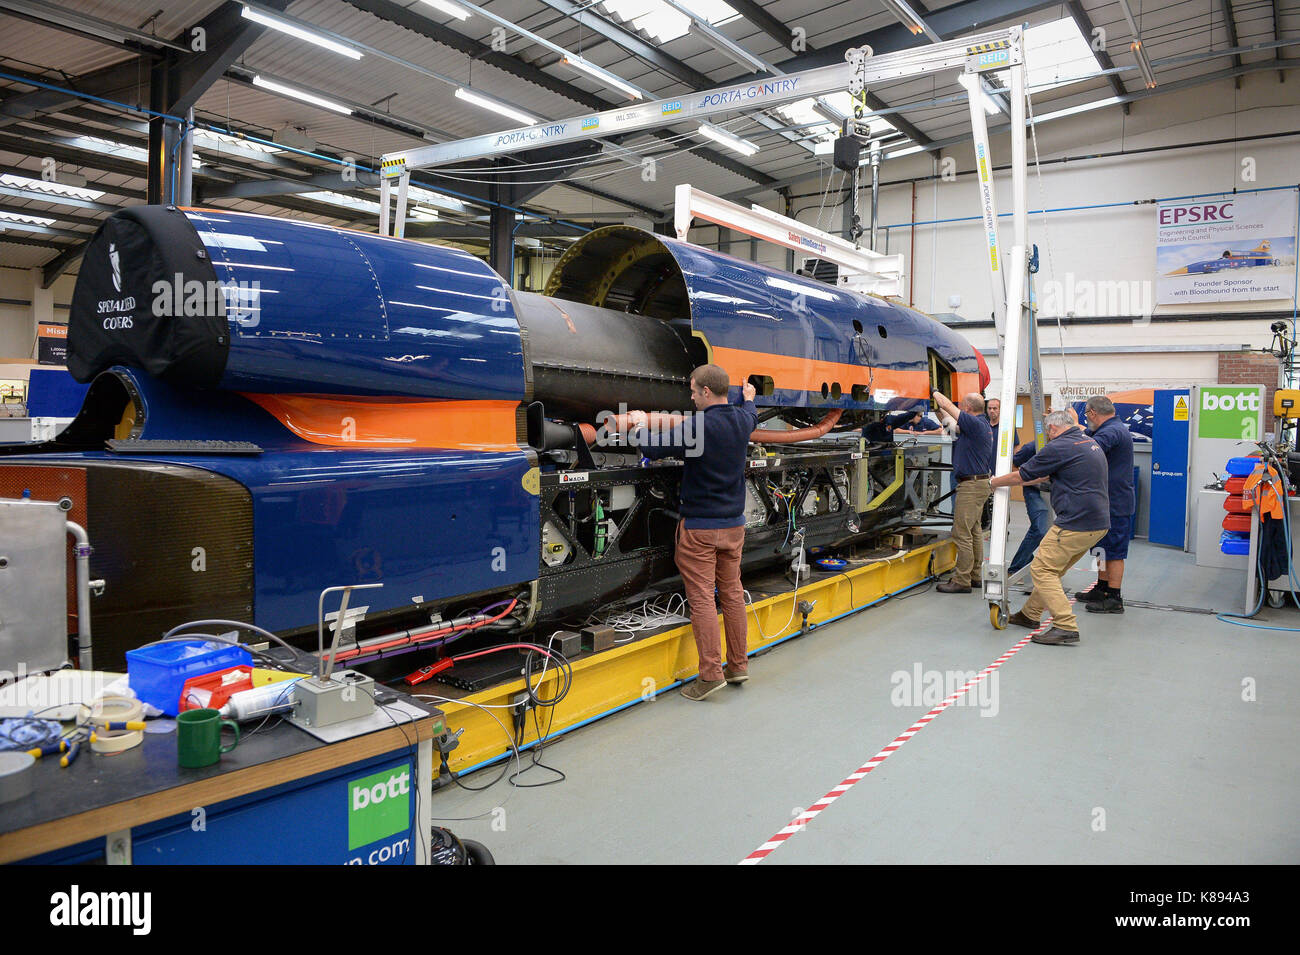 Engineers move the upper chassis, which houses the jet engine, on a gantry for mounting to the lower chassis, at the Bloodhound Technical Centre in Avonmouth, as the BLOODHOUND SSC car is prepared for testing in Newquay in October. Stock Photo